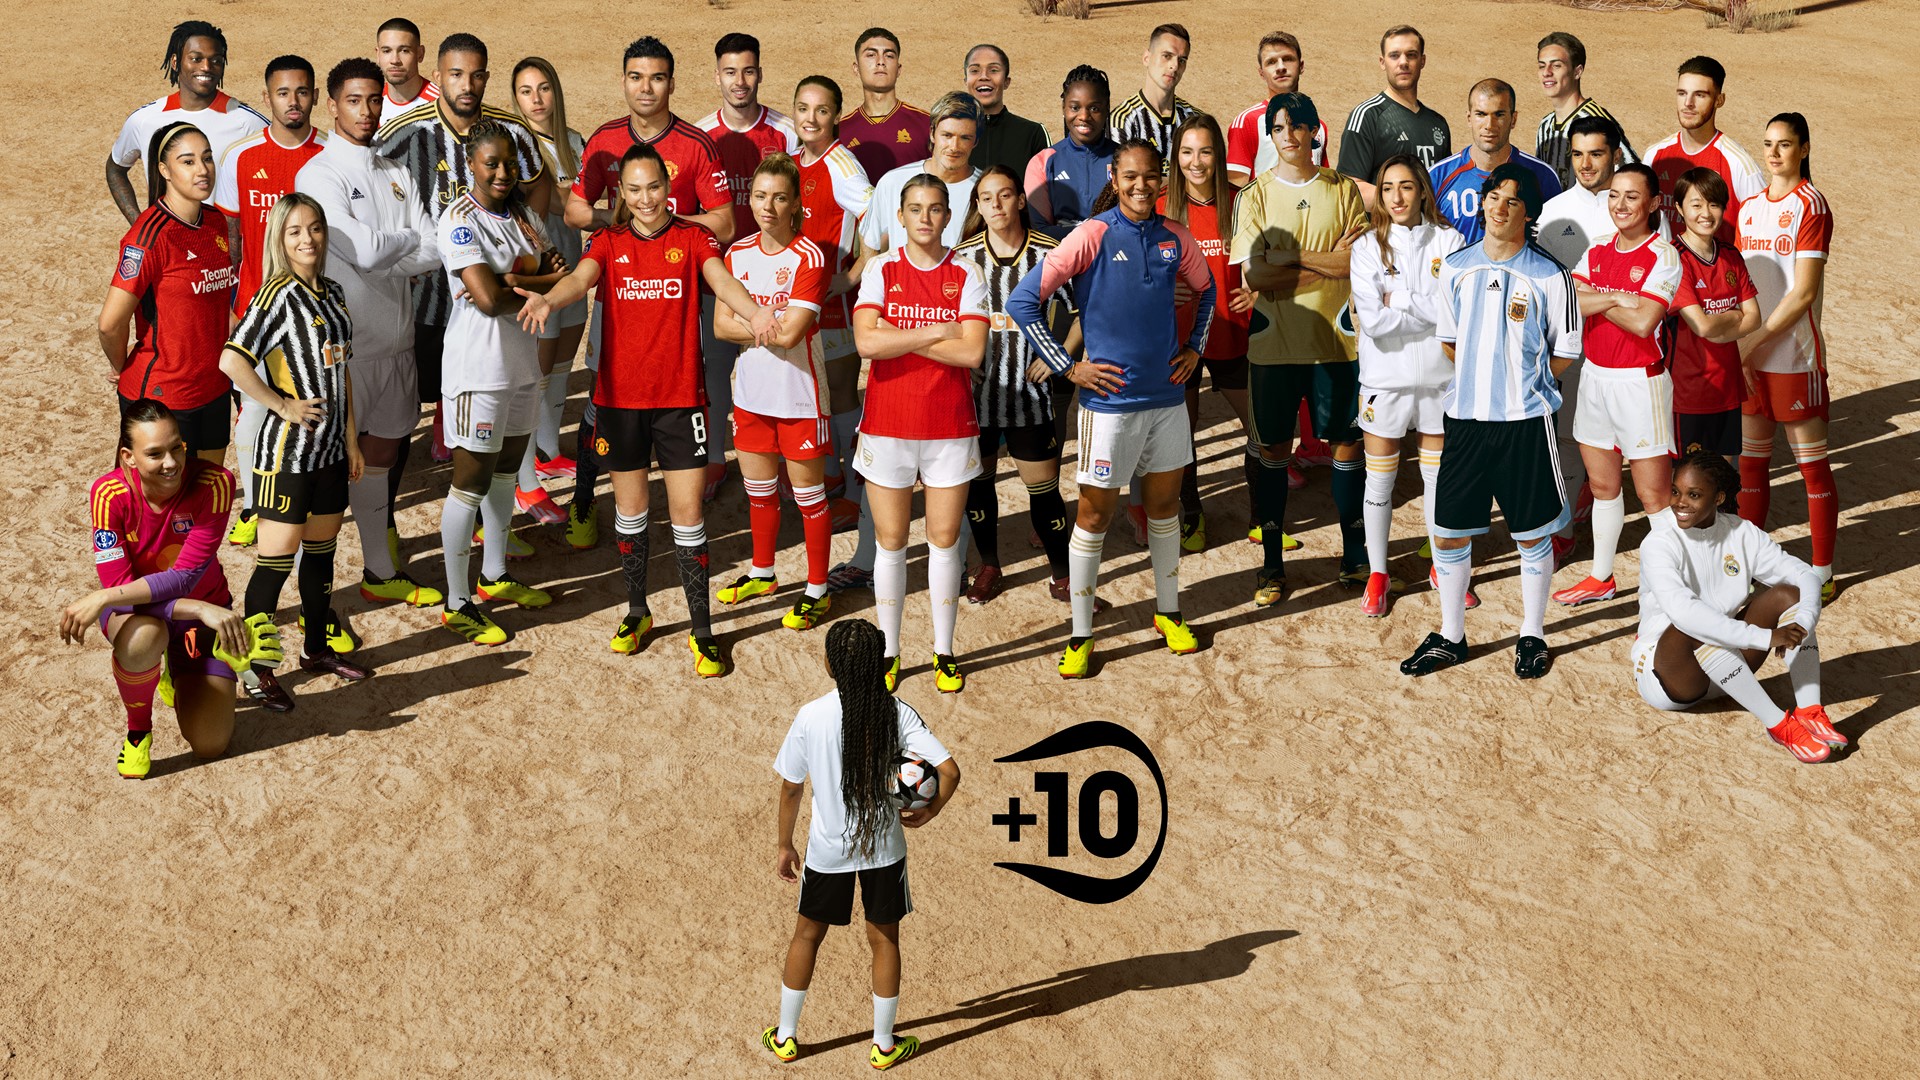 adidas Showcases Potential for Girls when Staying in Sport by Recreating Iconic 2006 Jose 10 Campaign Image with